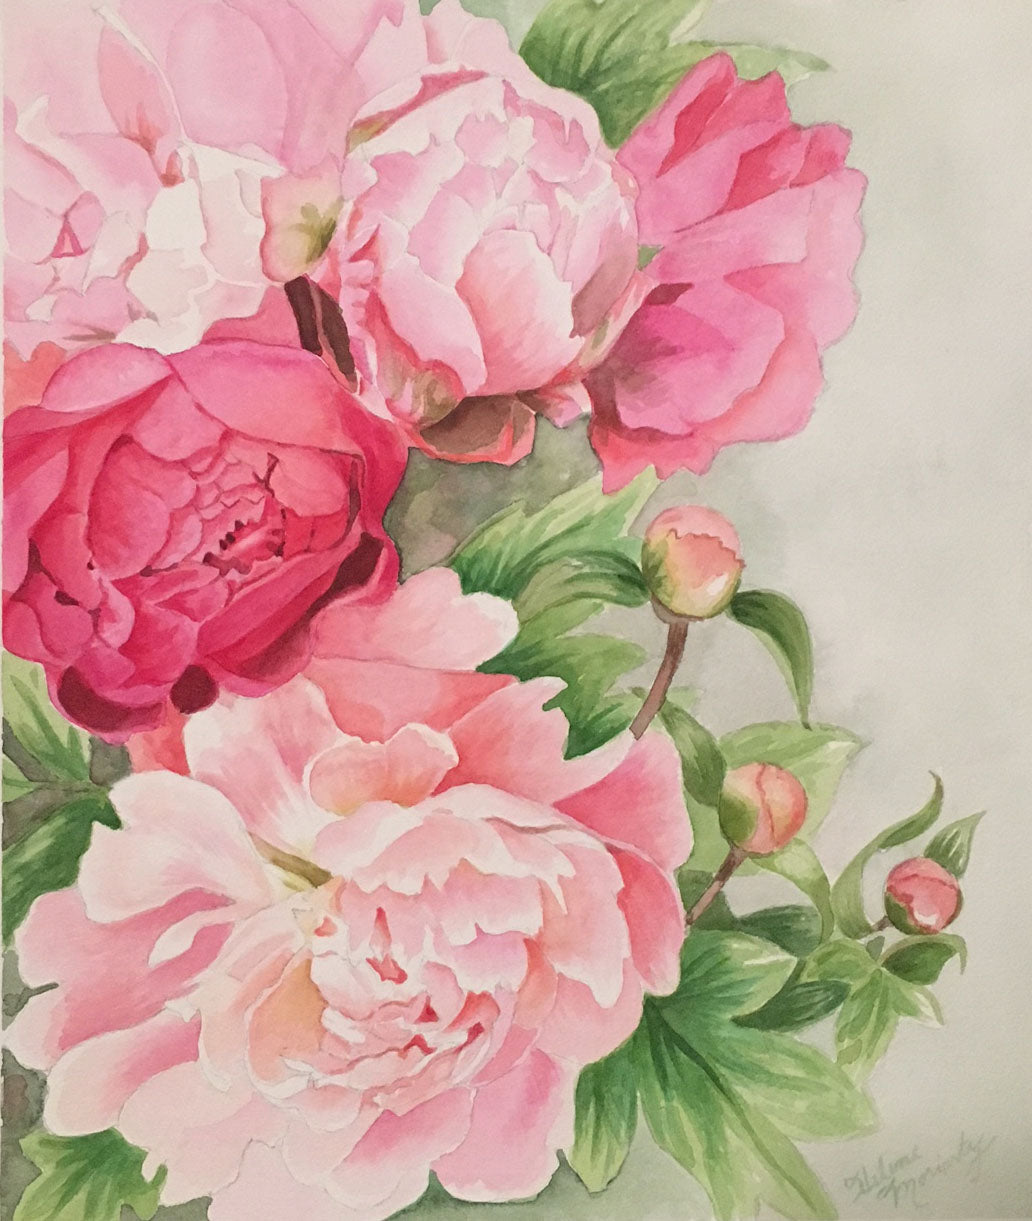 ‘ Peonies’: Fine Giclee Art Print from Original Watercolor Painting